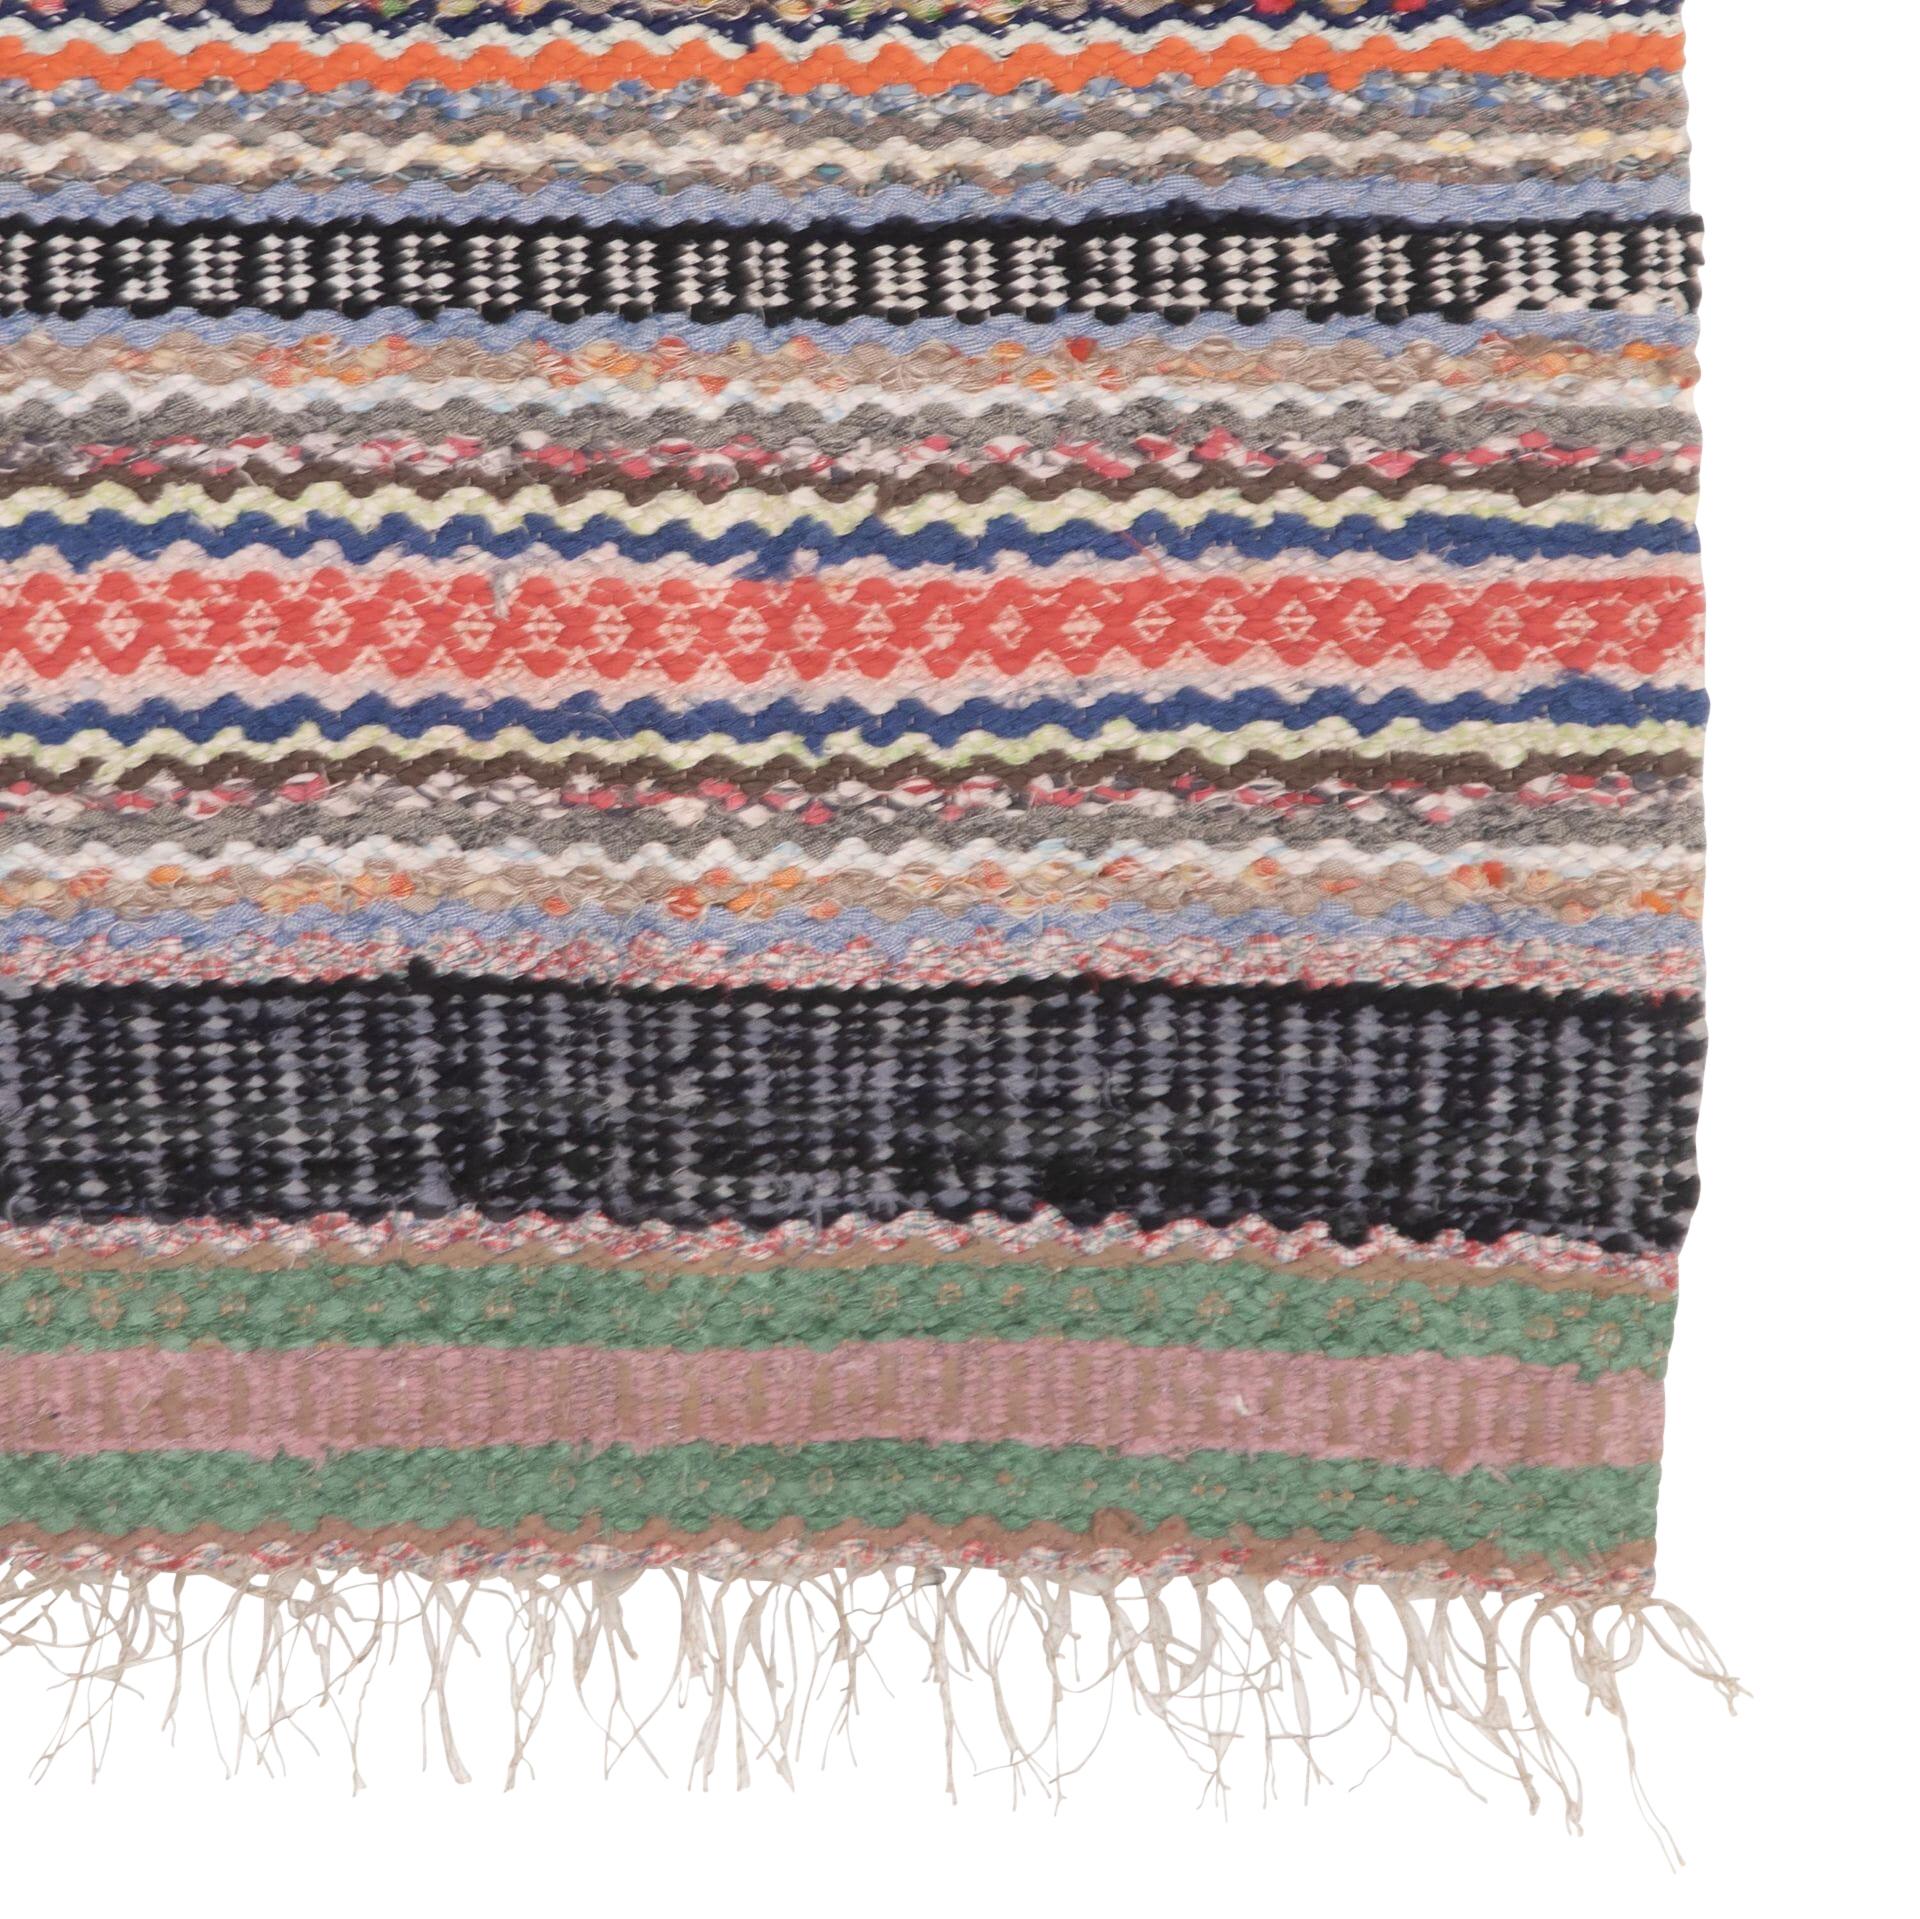 Traditional 20th Century Swedish rug in red, blue, black, orange and green. 
Circa 1950.